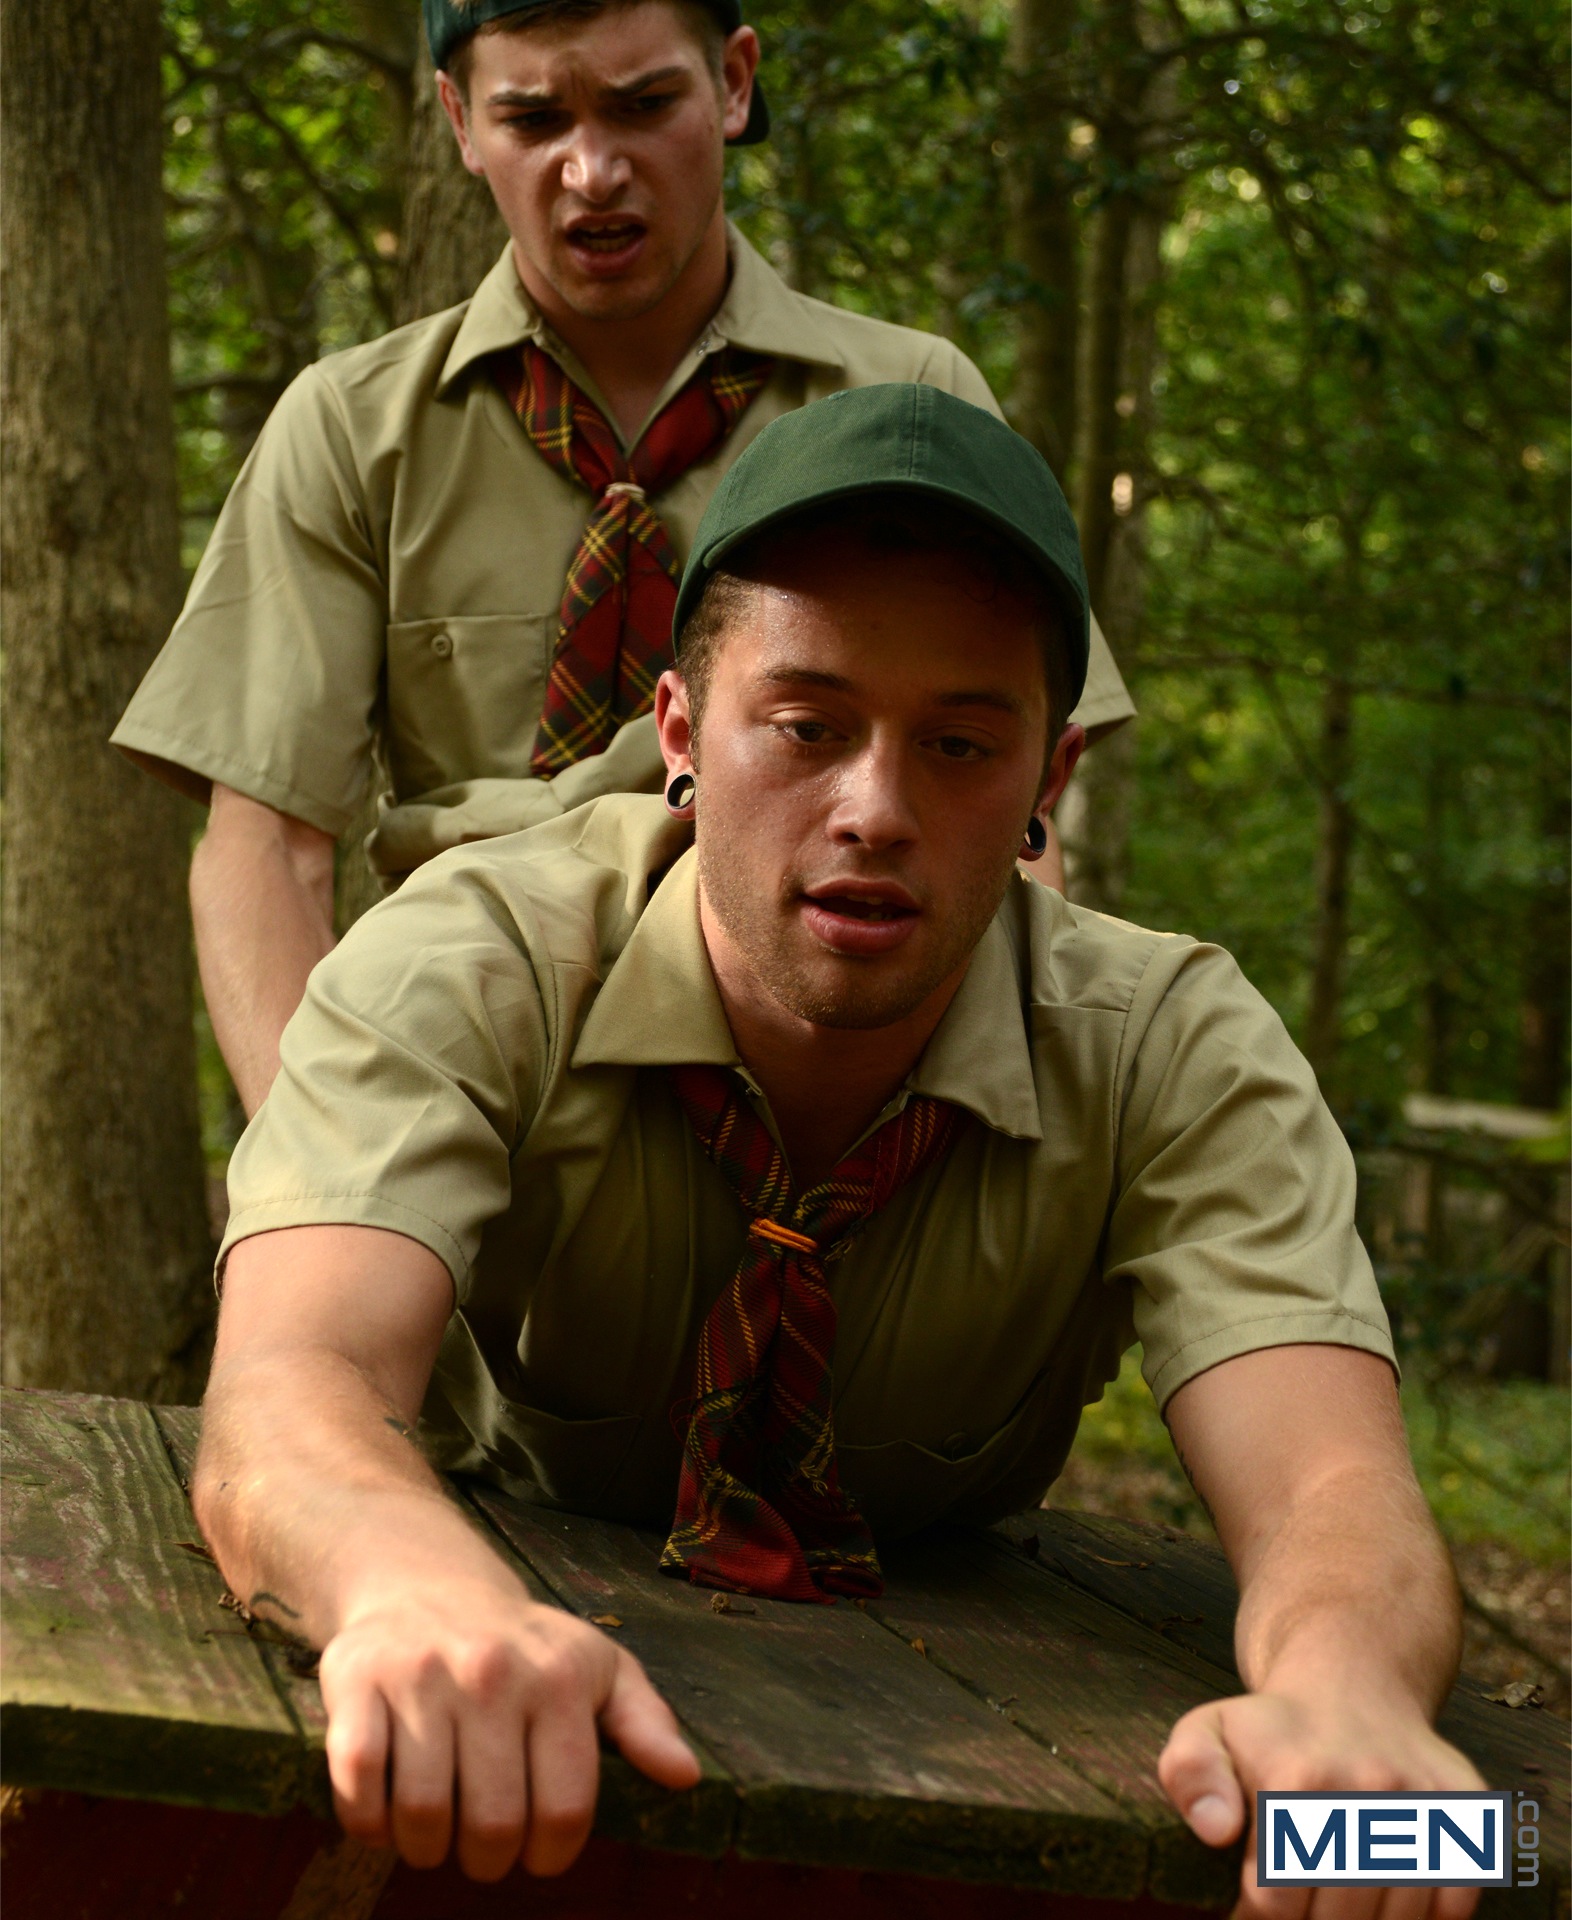 Johnny Rapid and CK Steel flip-fuck in Scouts by gay porn site Big Dicks At School.